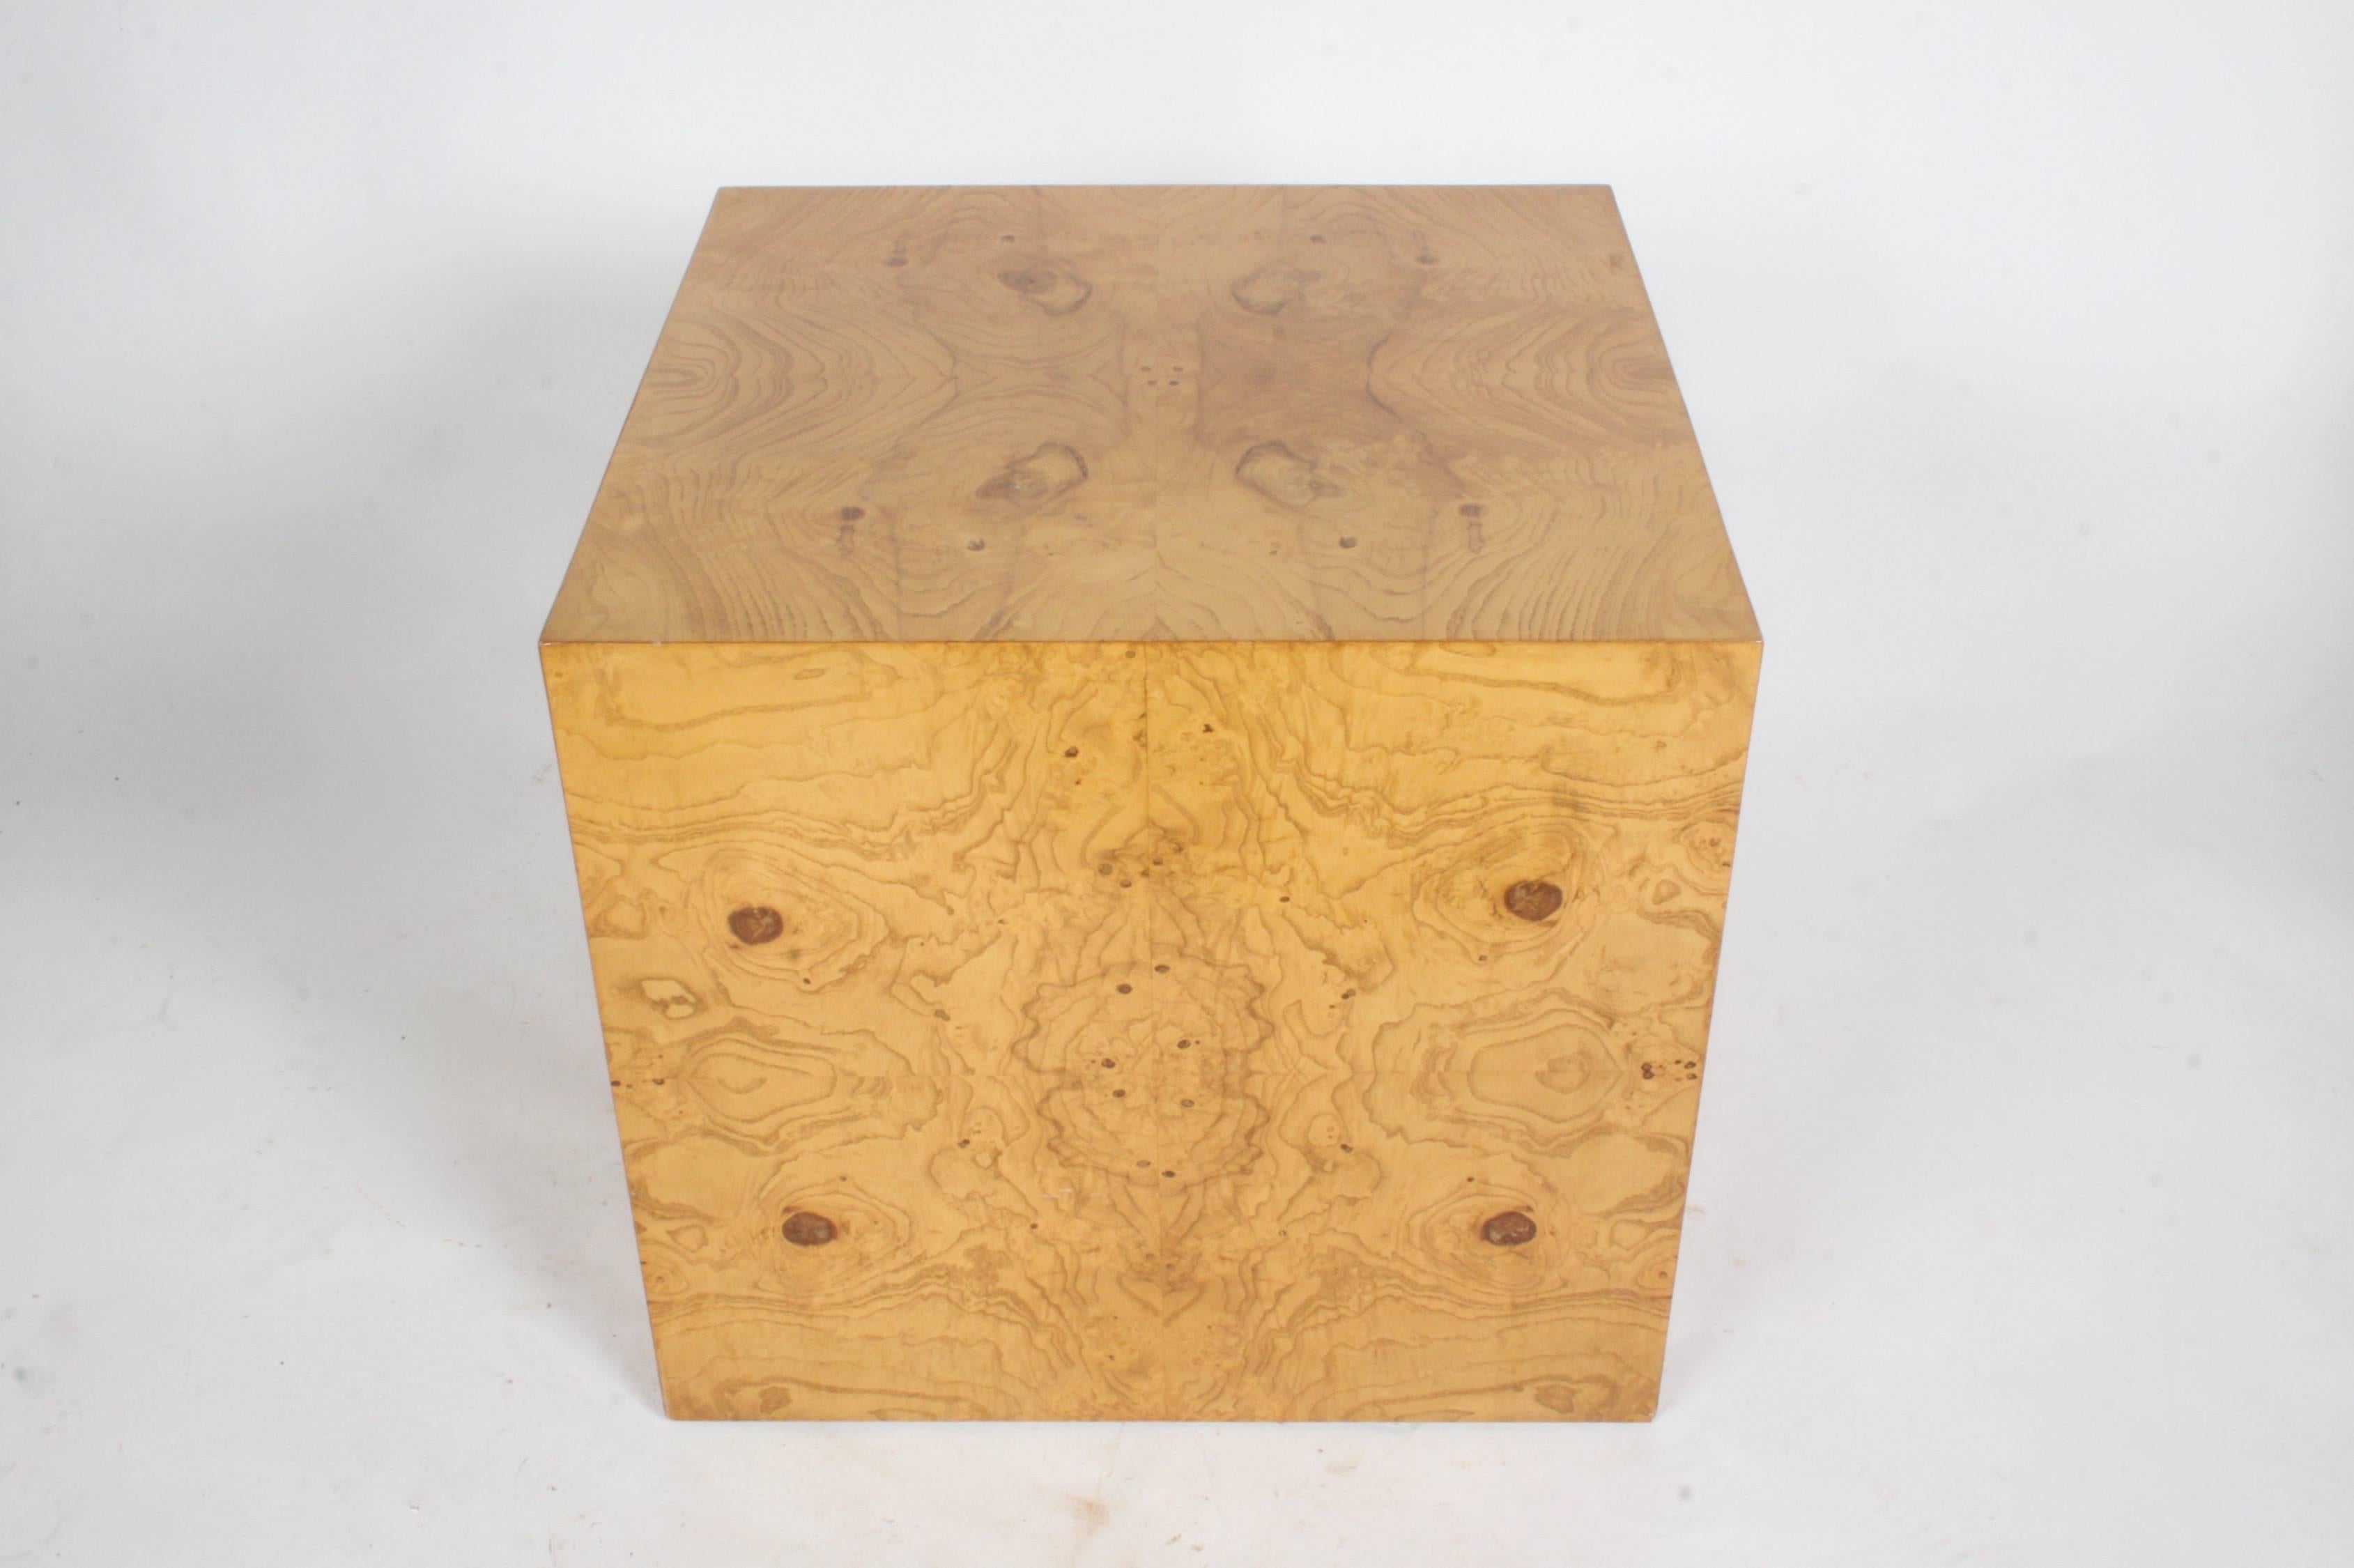 Milo Baughman for Thayer Coggin pair of burl wood cube end tables. Only one photographed. Can be used for end tables, nightstands or display cubes.